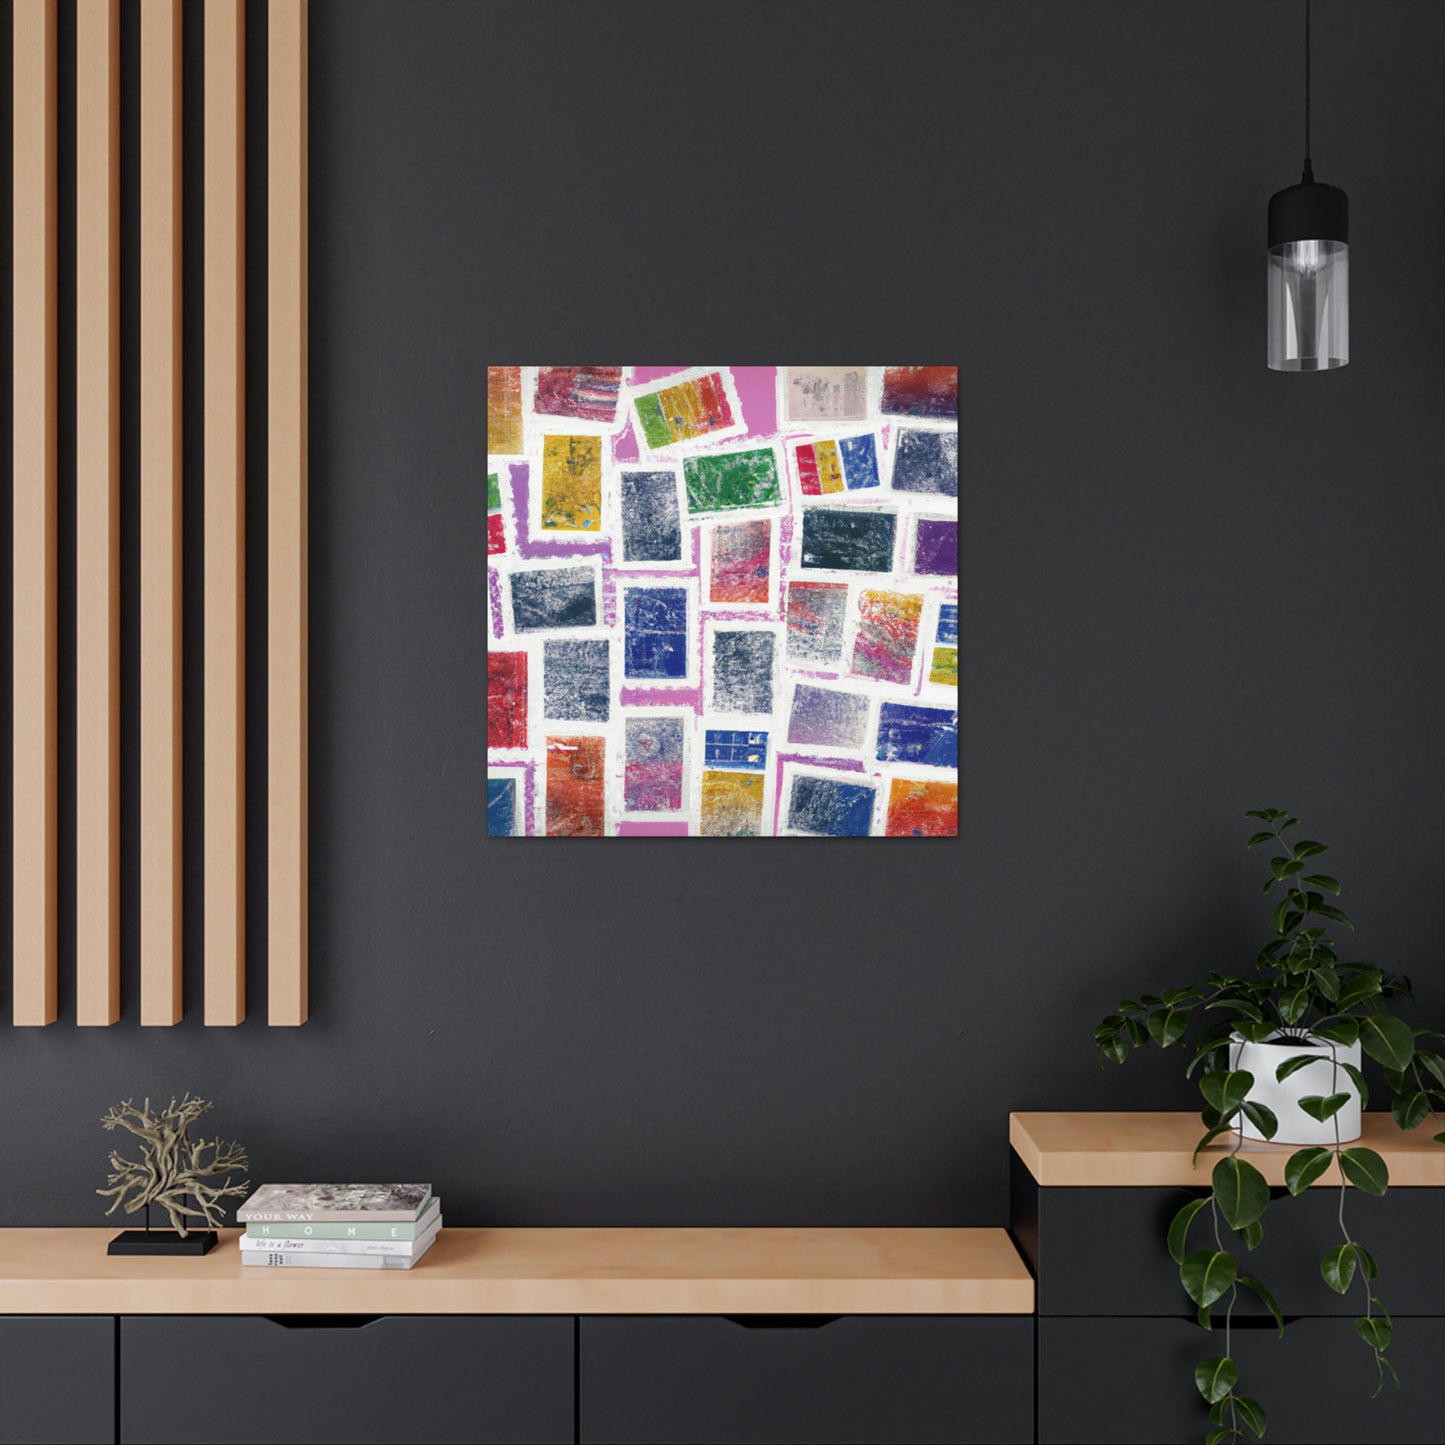 "Cultural Celebrations" - Postage Stamp Collector Canvas Wall Art